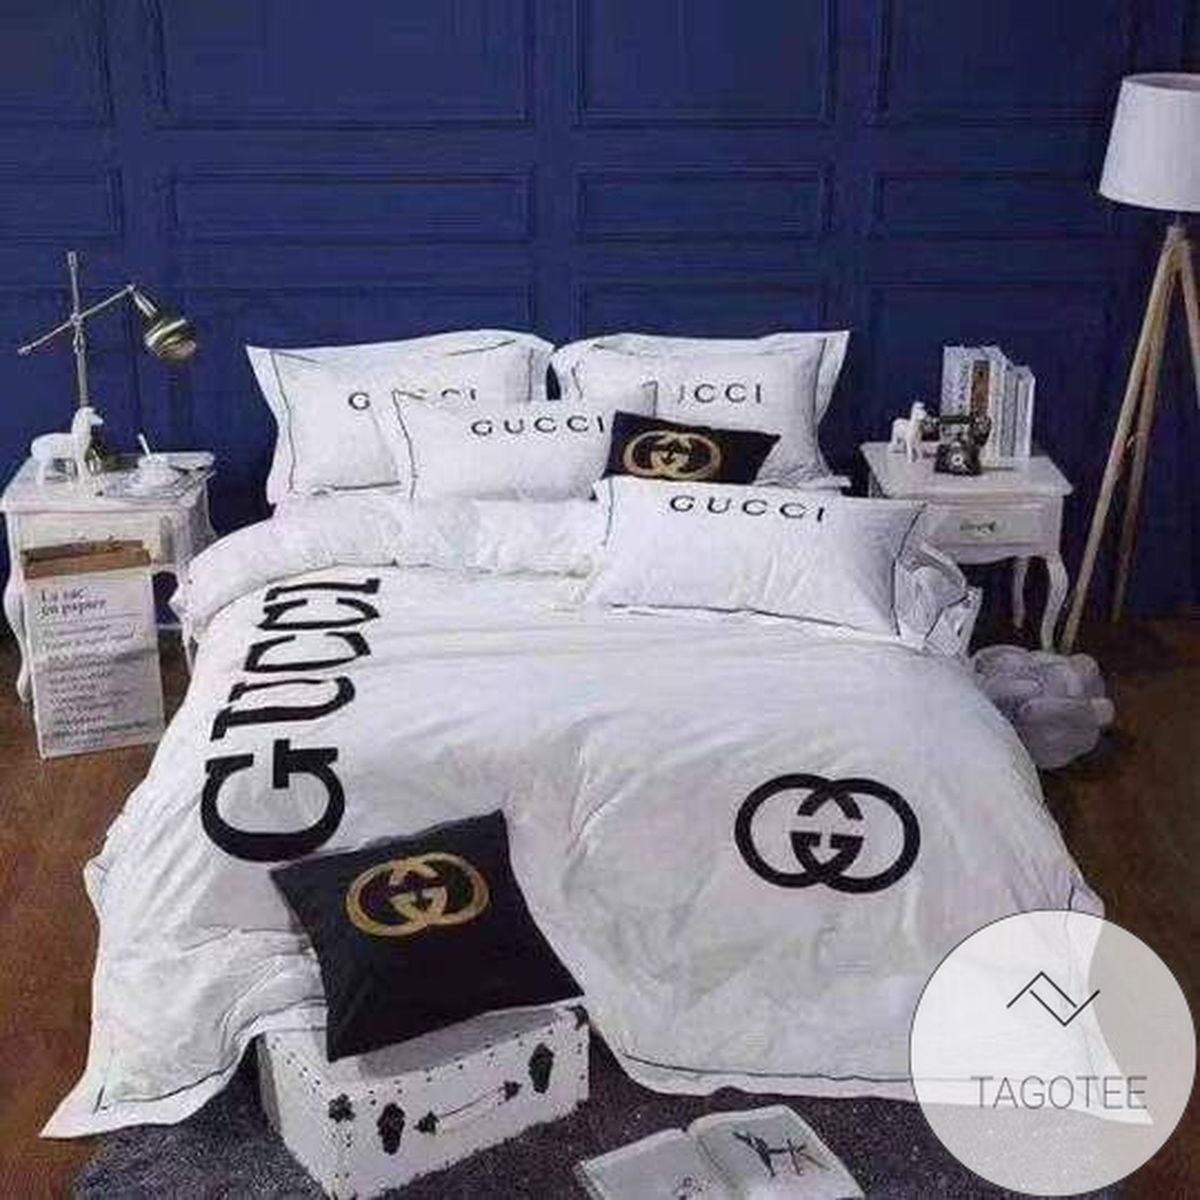 Gucci White Black Bedding Sets Duvet Cover Sheet Cover Pillow Cases Luxury Bedroom Sets 2022